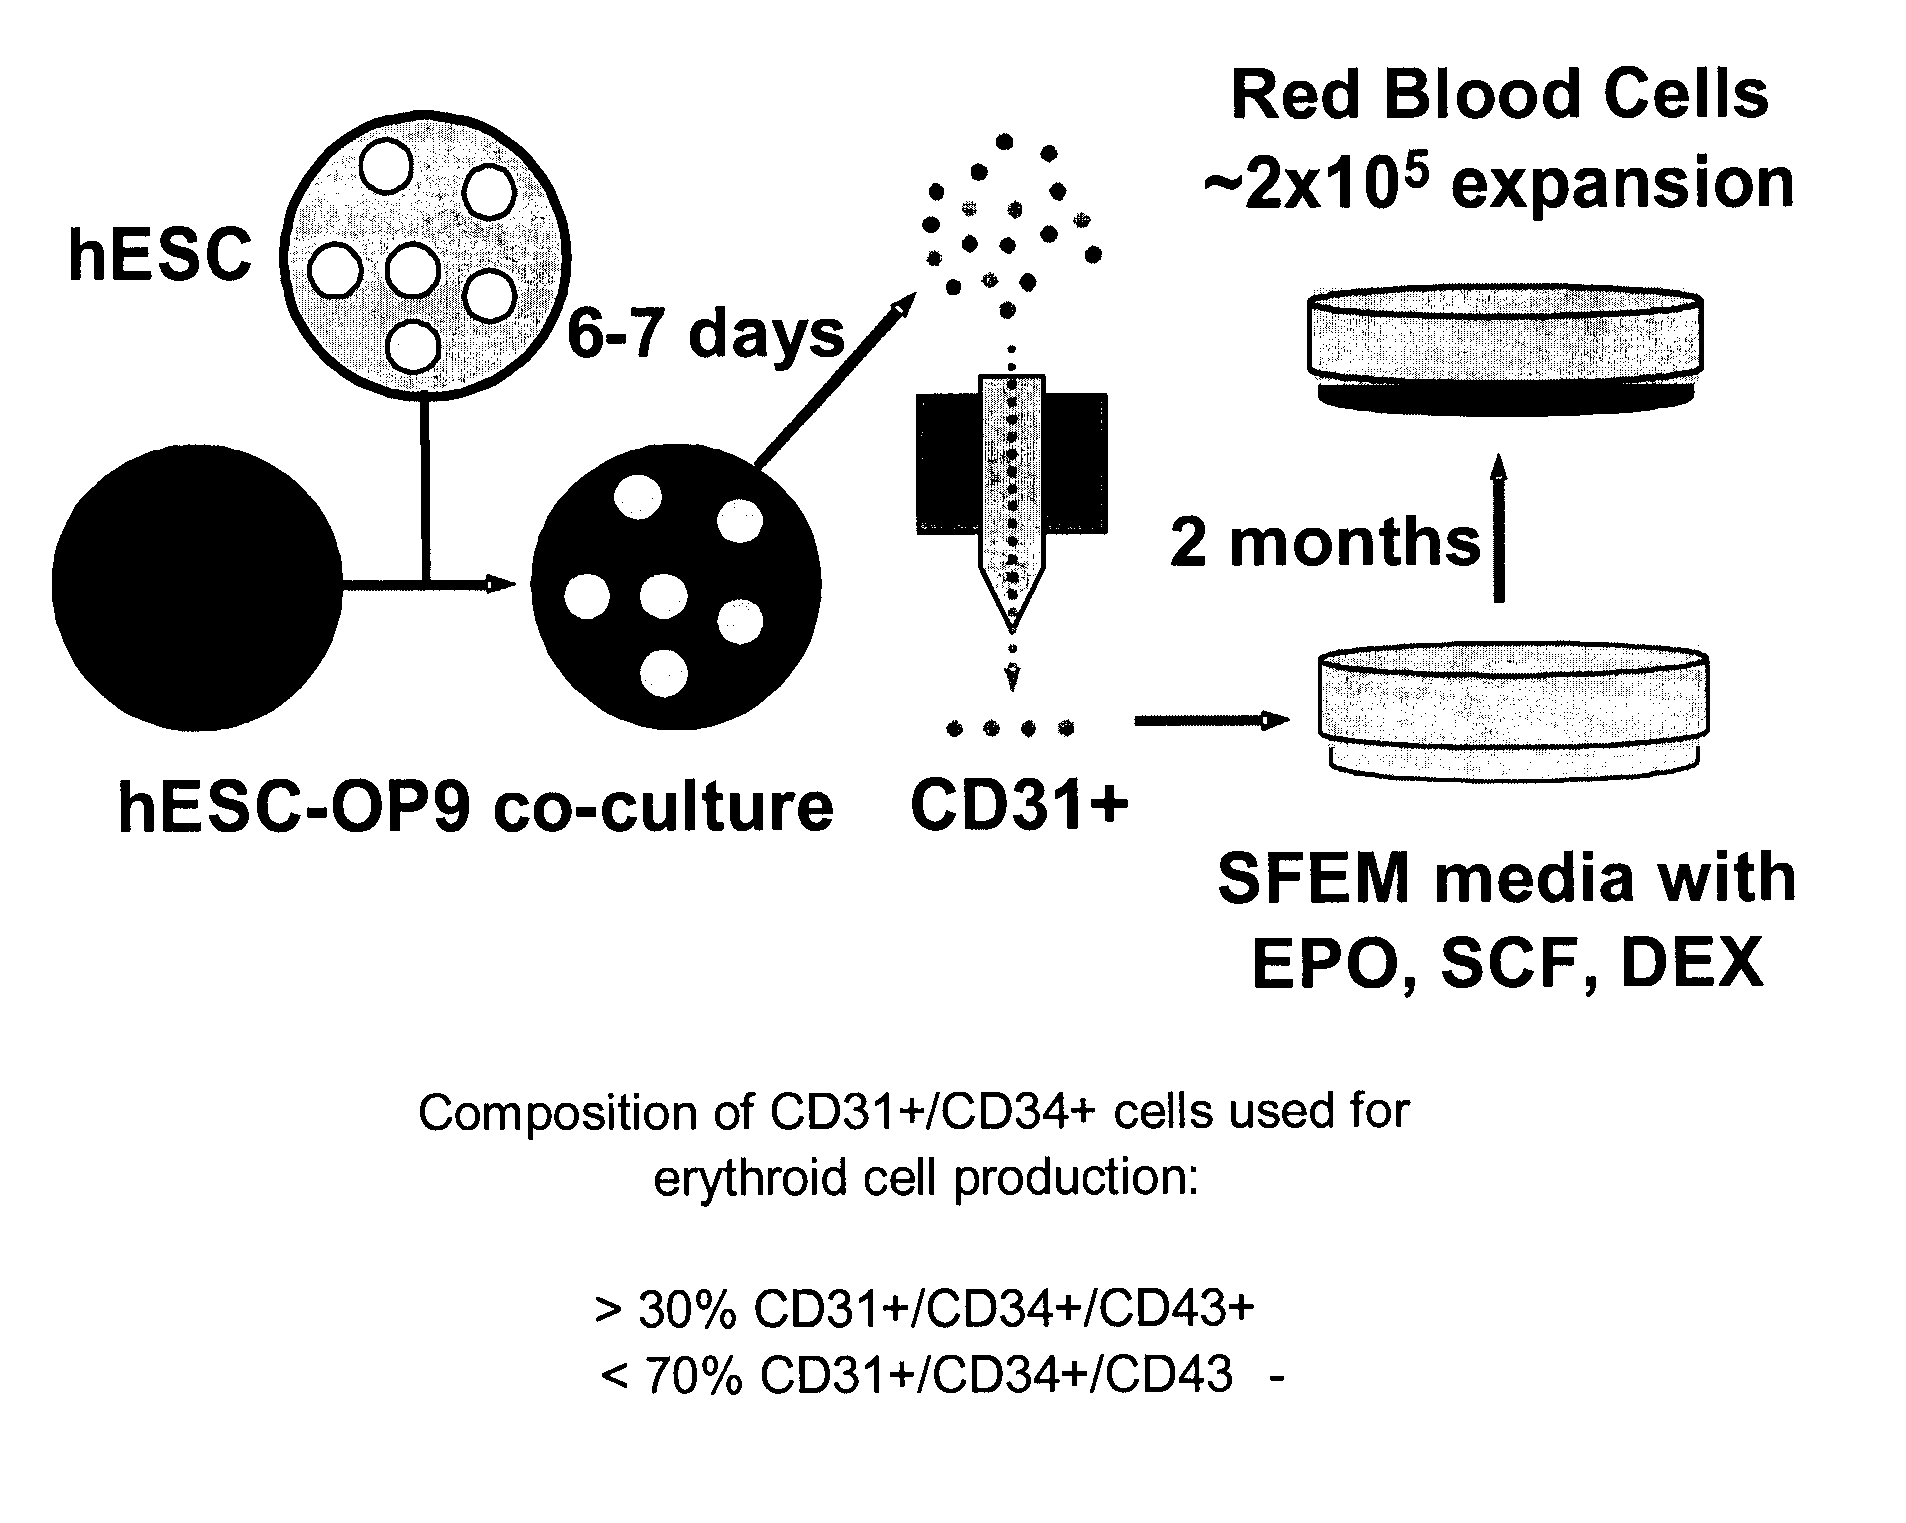 ERYTHROID CELLS PRODUCING ADULT-TYPE Beta-HEMOGLOBIN GENERATED FROM HUMAN EMBRYONIC STEM CELLS